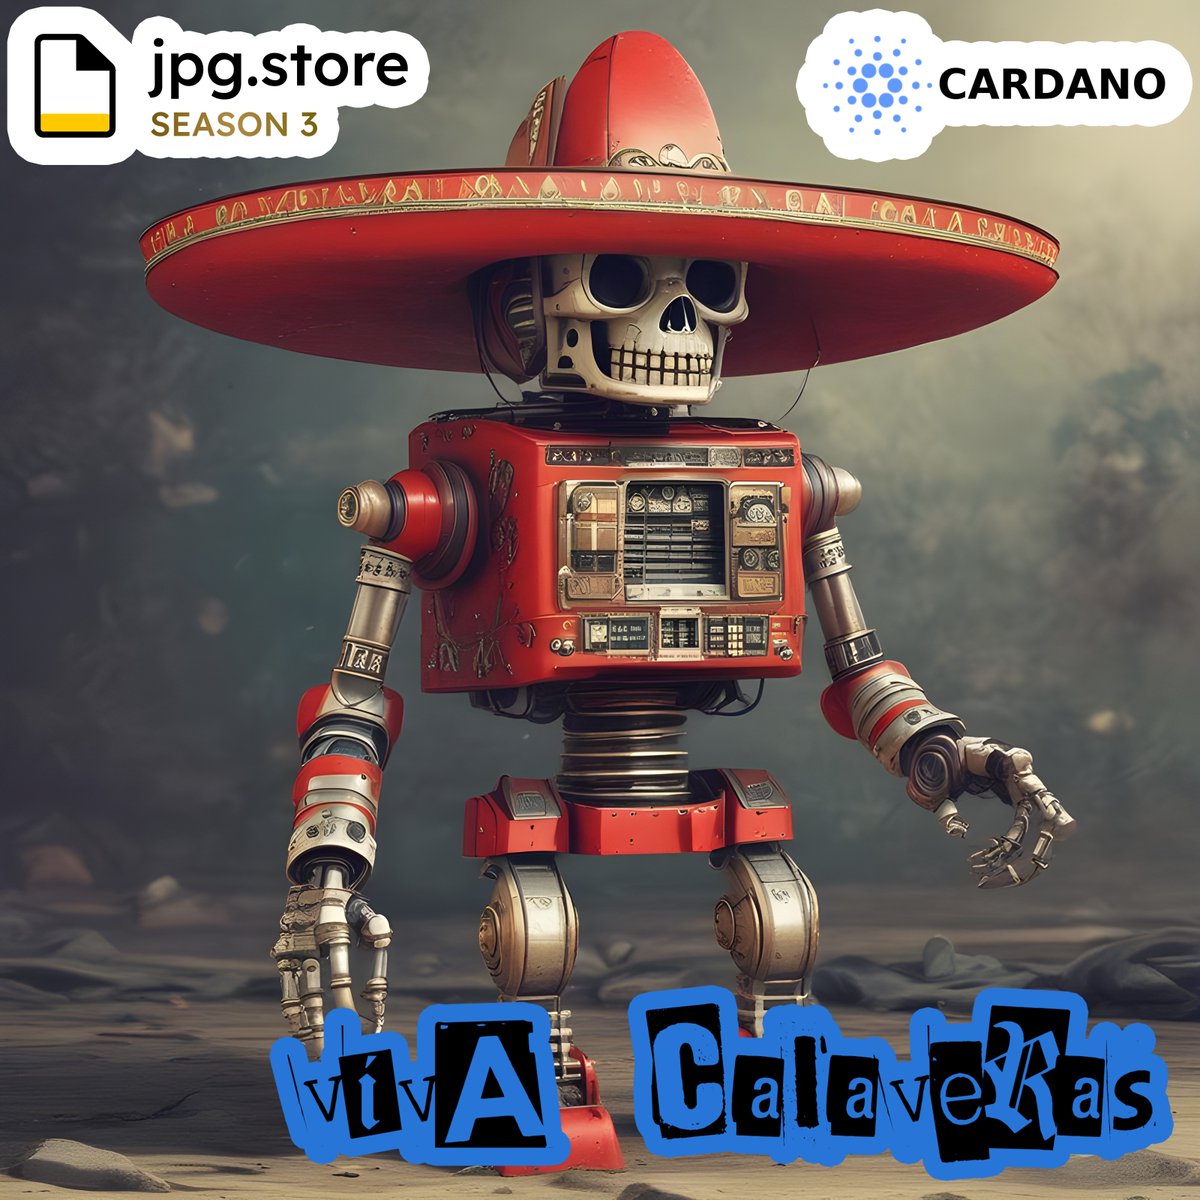 Viva Calaveras on Cardano via jpg.store ! These NFTs can be redeemed for a signed 3D printed K-SCOPES® Trading Card.

Nico
jpg.store/listing/226786…

#cardano #ADA #CardanoNFT #NFT #vivacalaveras #calaveras #kscopes #tradingcards #3dprinting #AI #AImusic